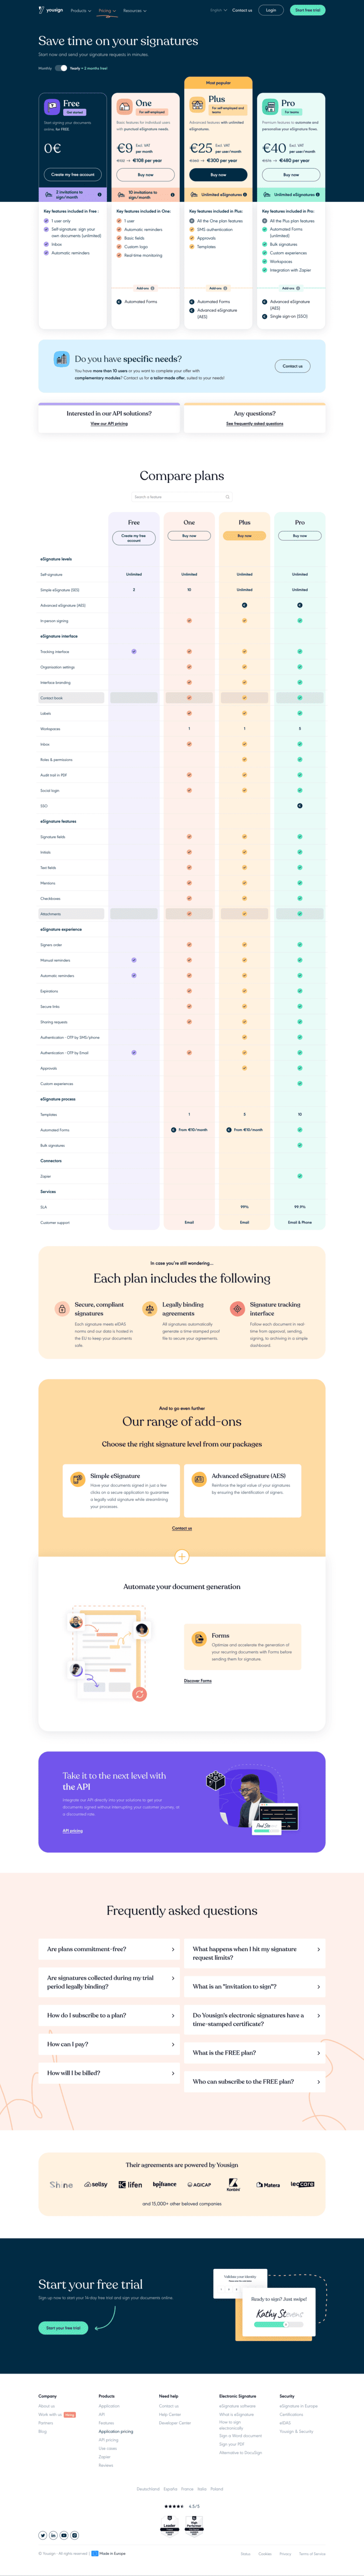 yousign pricing page